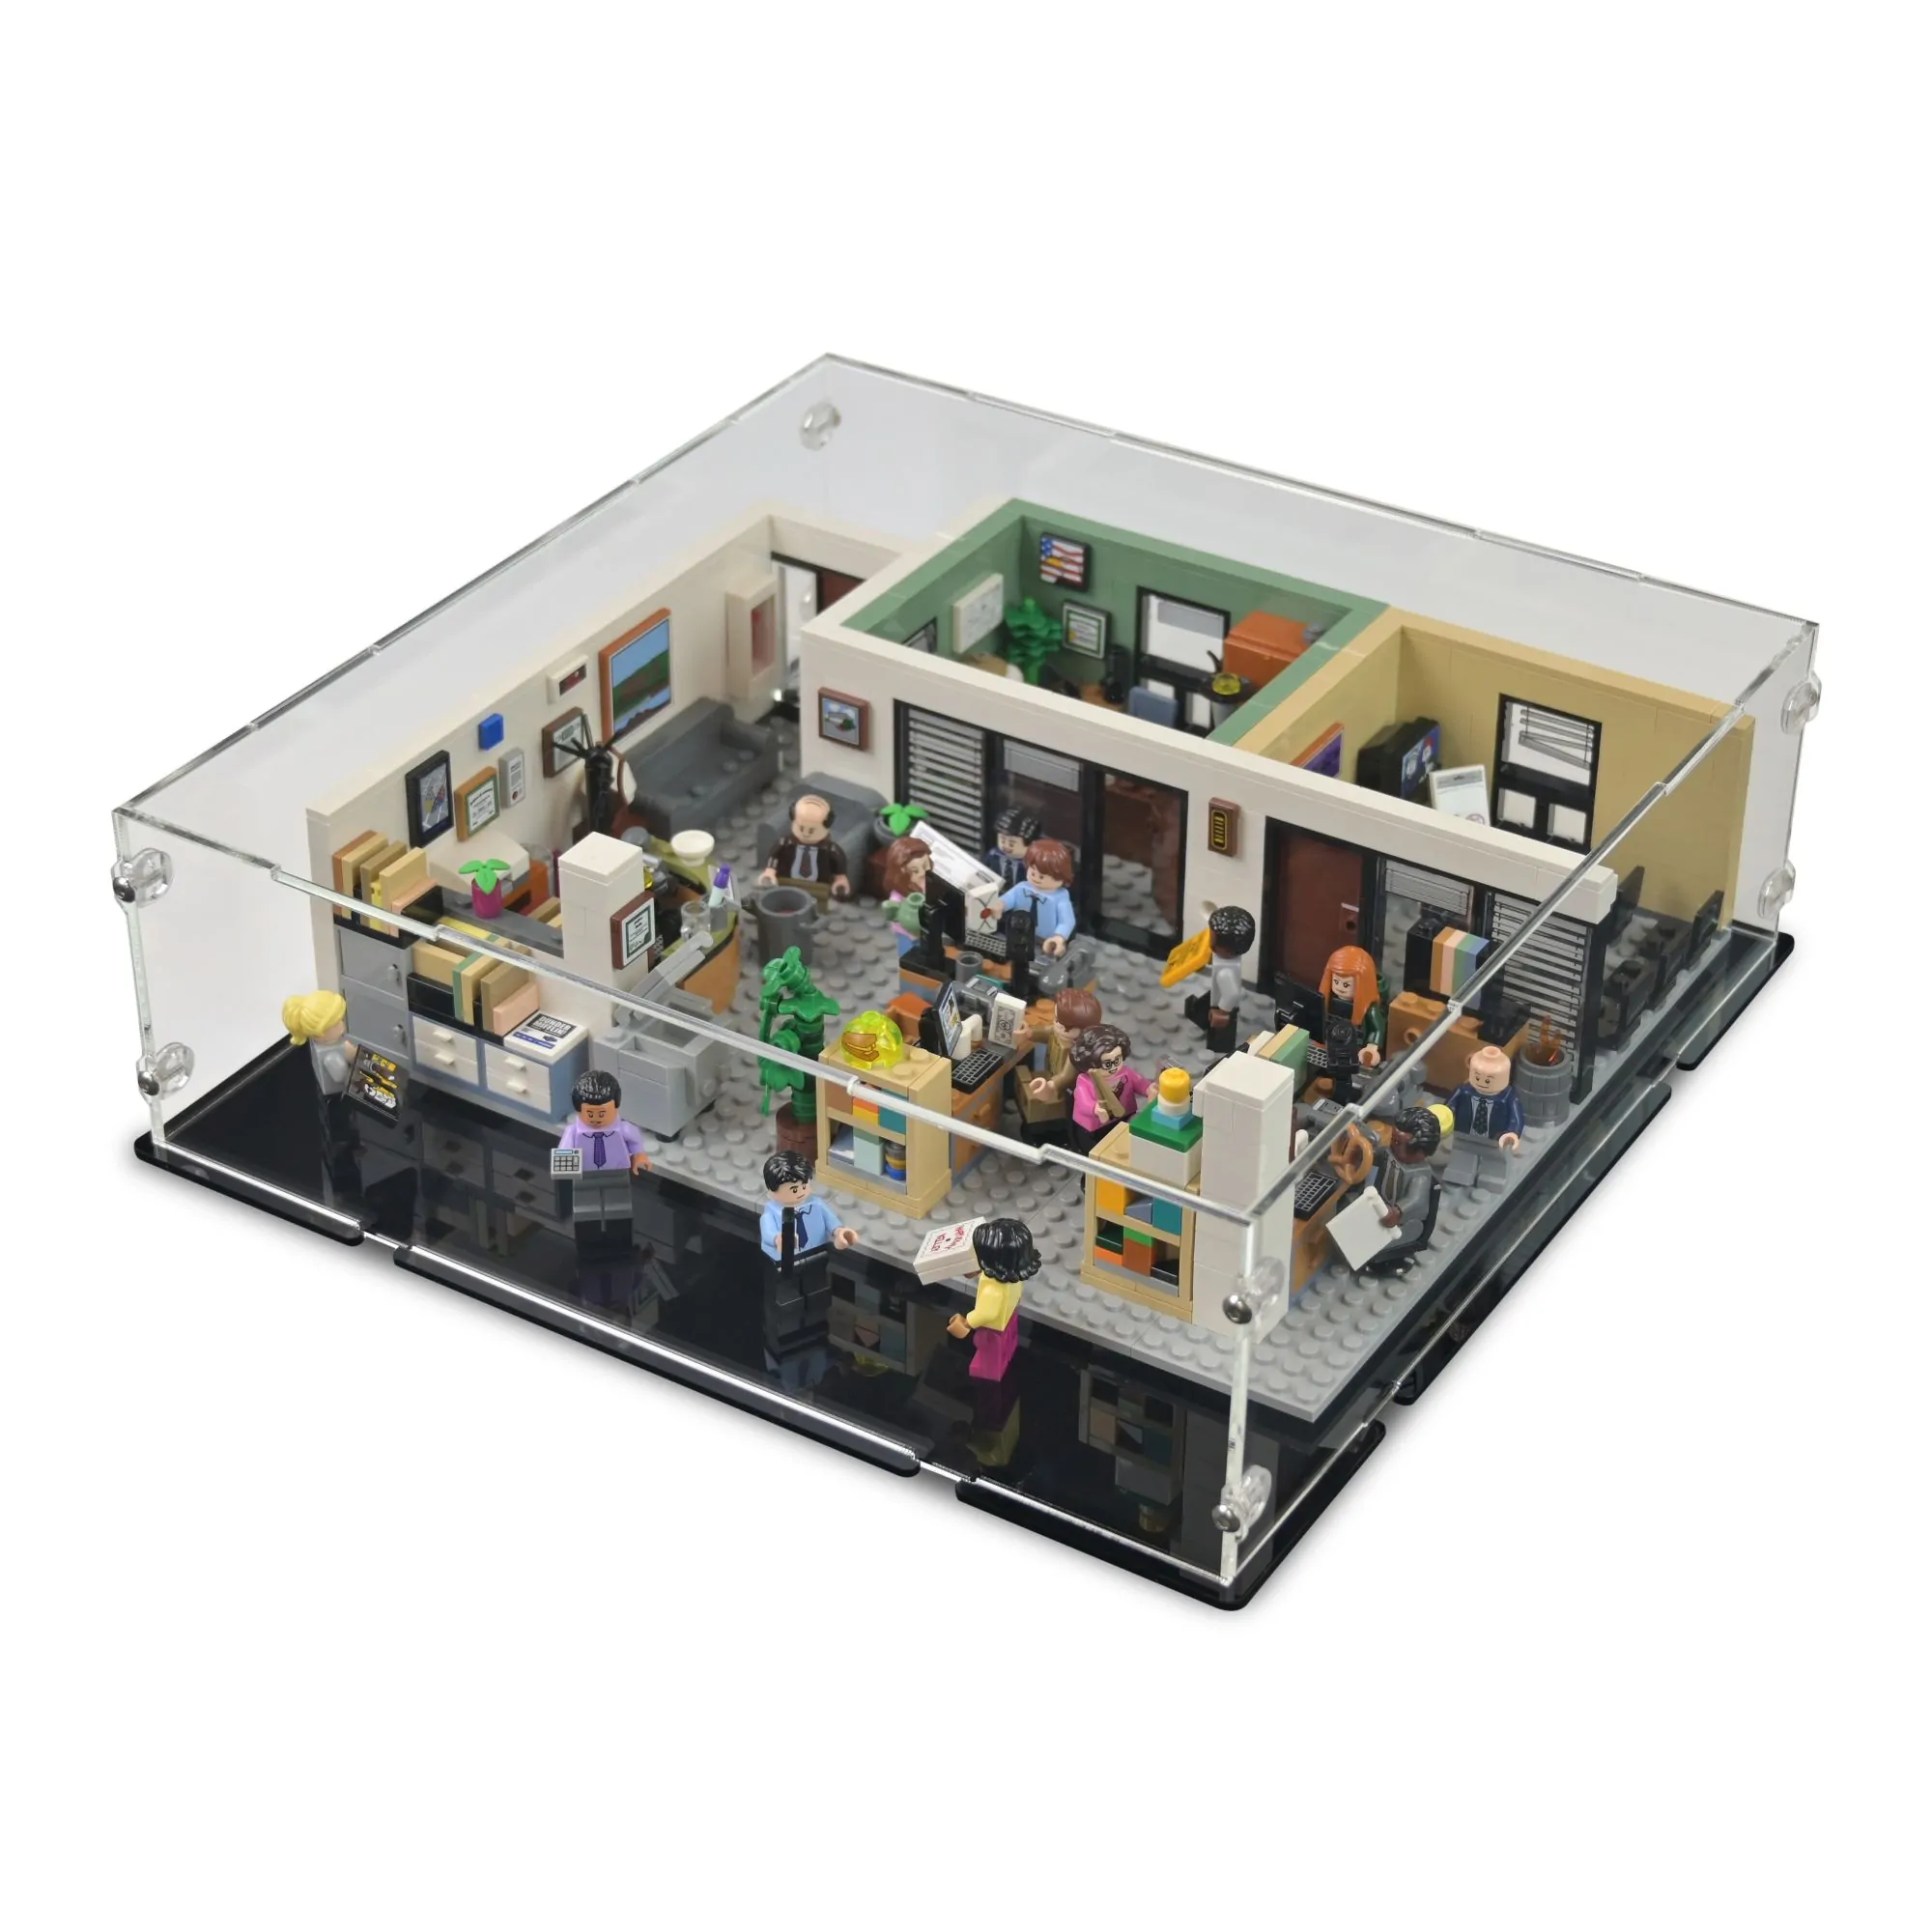 Acrylic Display Case for The Office | iDisplayit